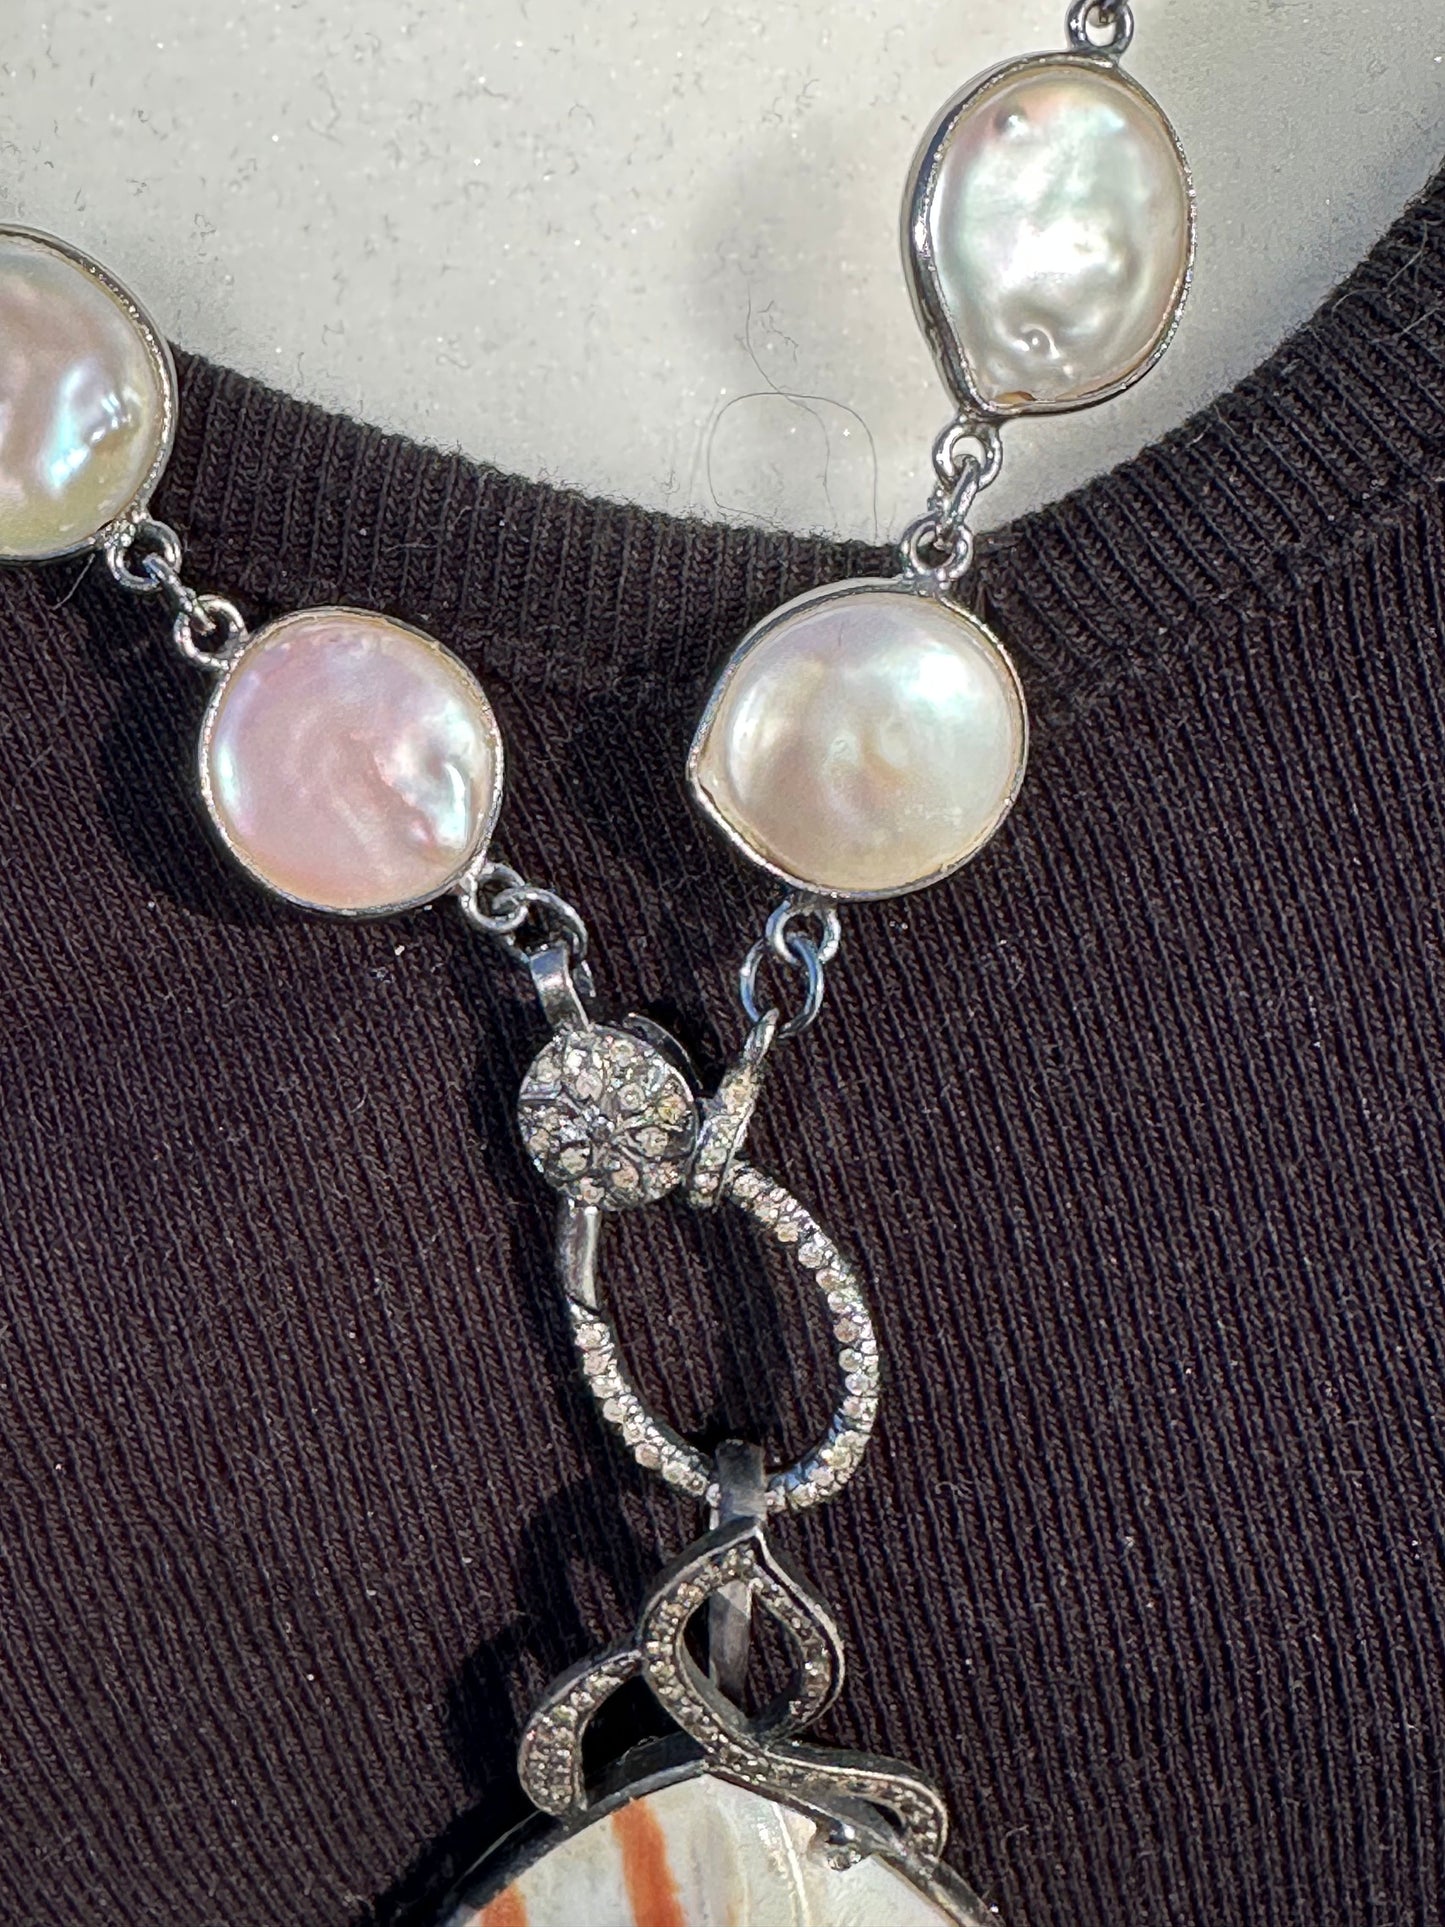 Mother of Pearl & Diamond Necklace